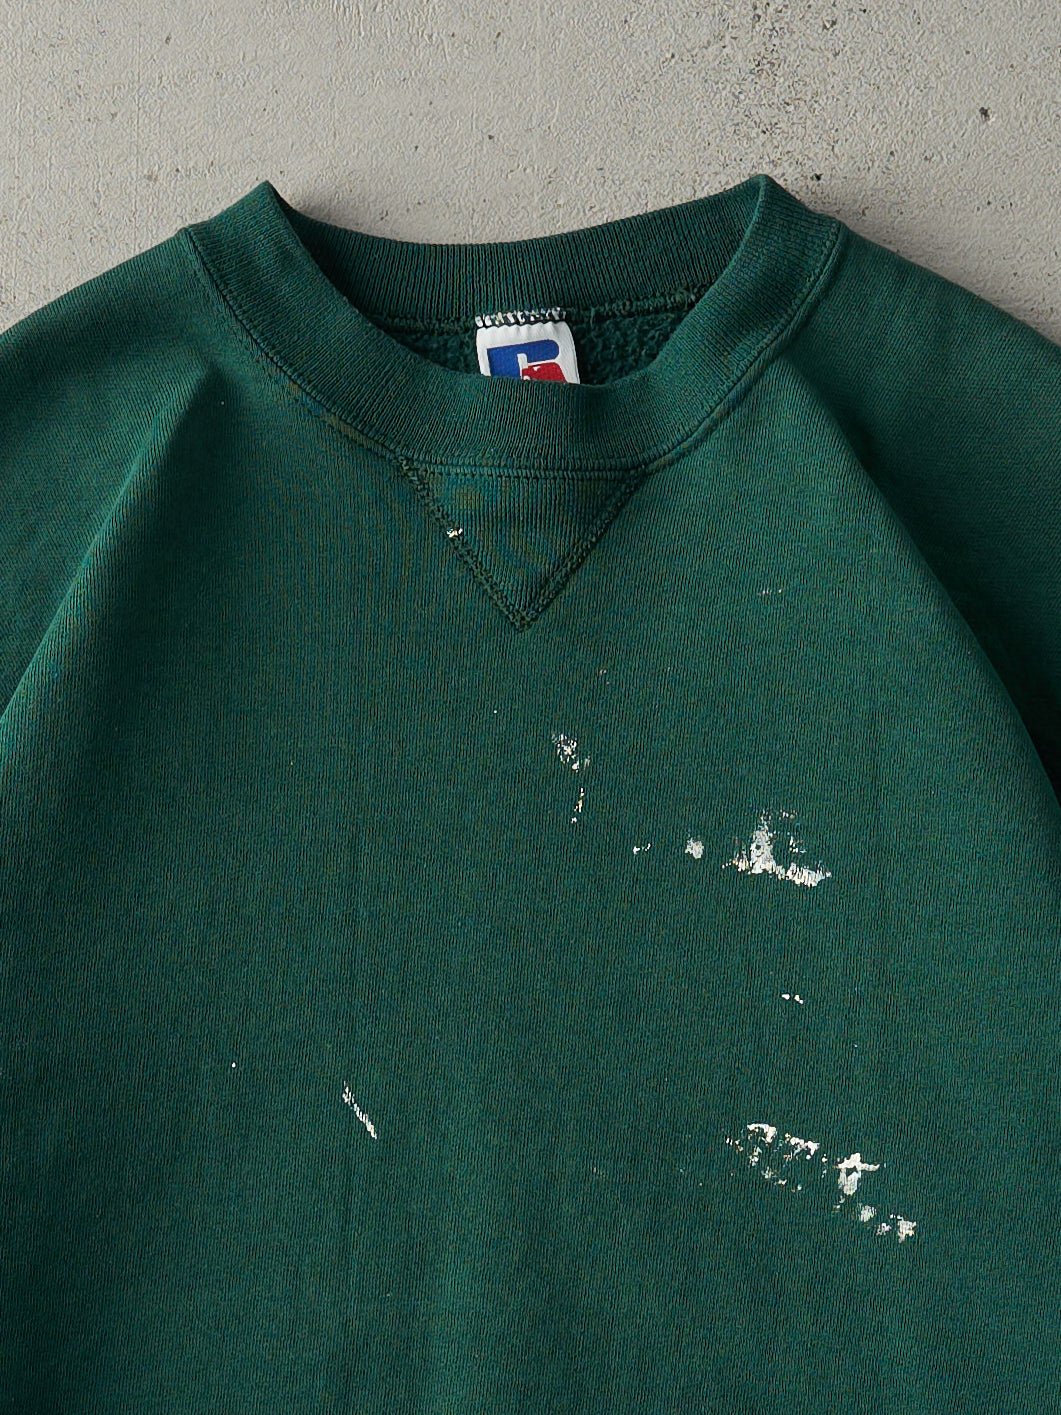 Vintage 90s Green Russell Athletic Blank Crewneck (L)